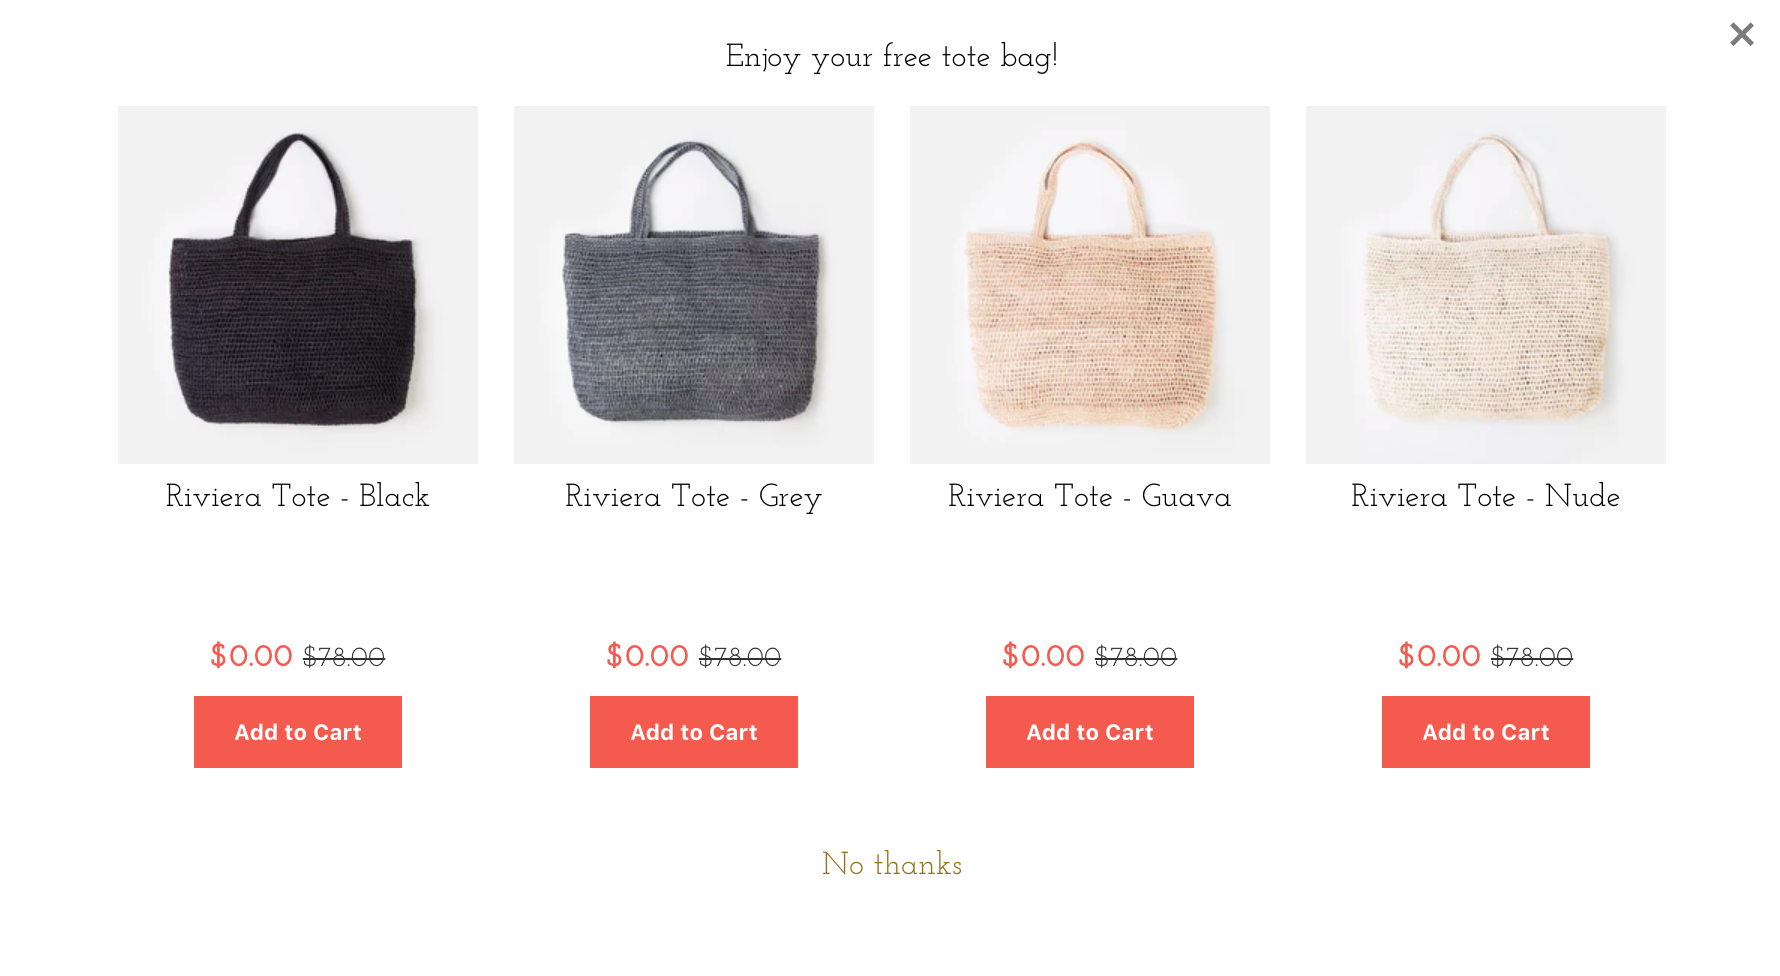 A popup offering customers their choice of a free tote bag after reaching a spend goal.